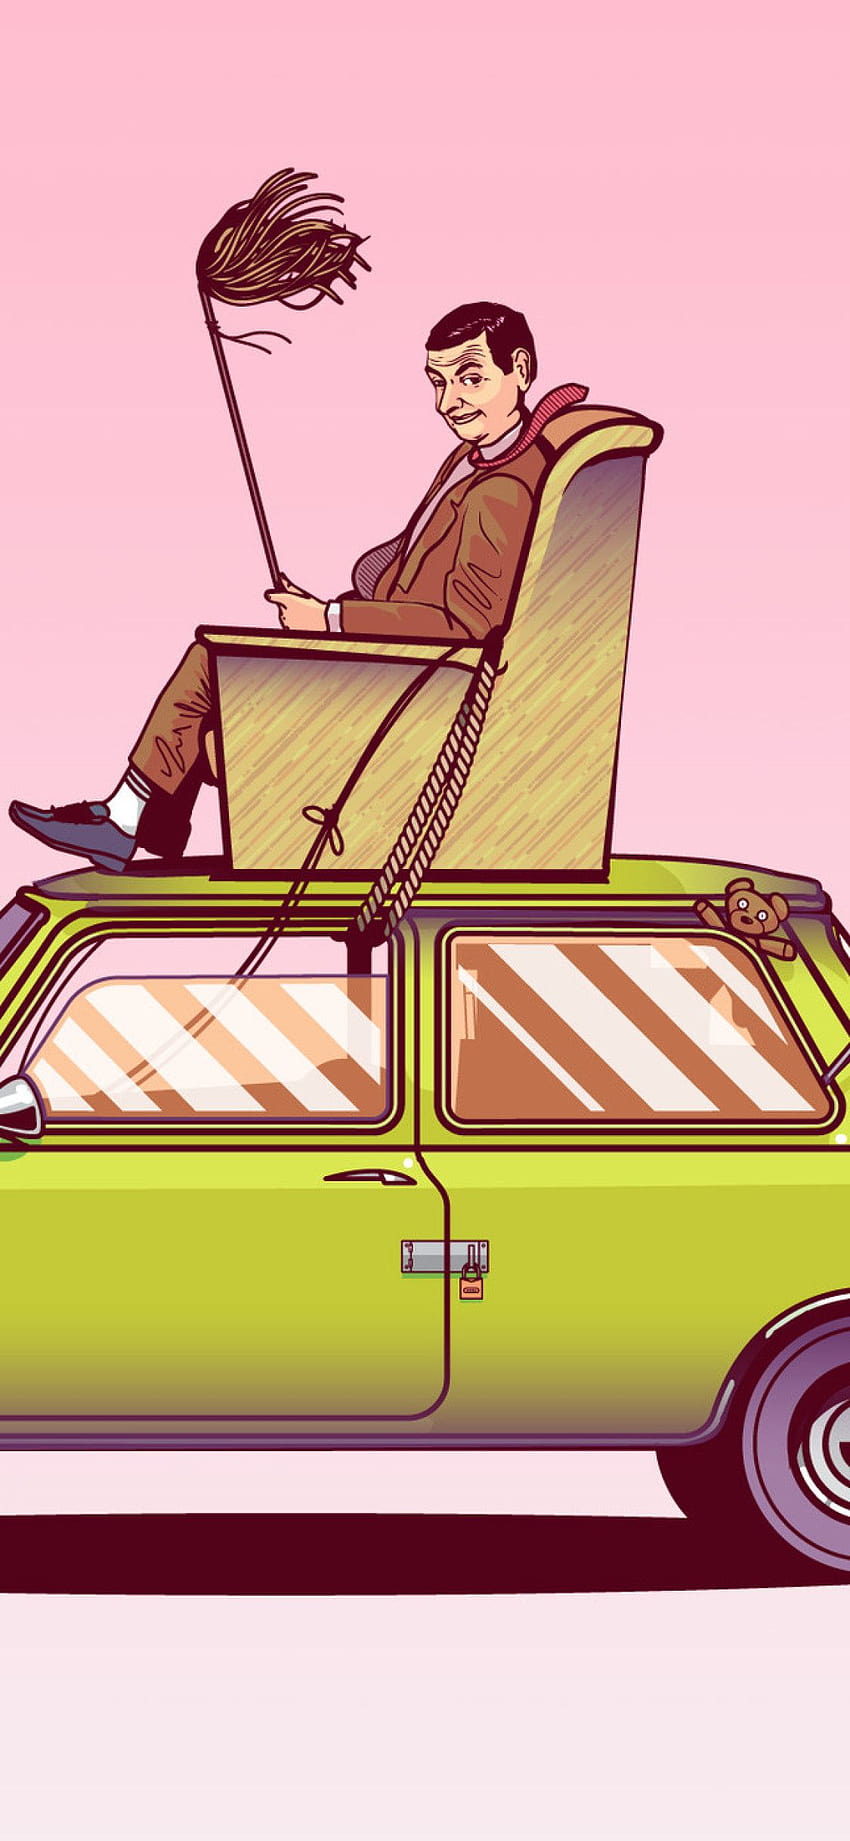 1125x2436 Mr Bean Sitting On Top Of His Car Vector Art Iphone XS, mr bean cartoon android mobile HD phone wallpaper